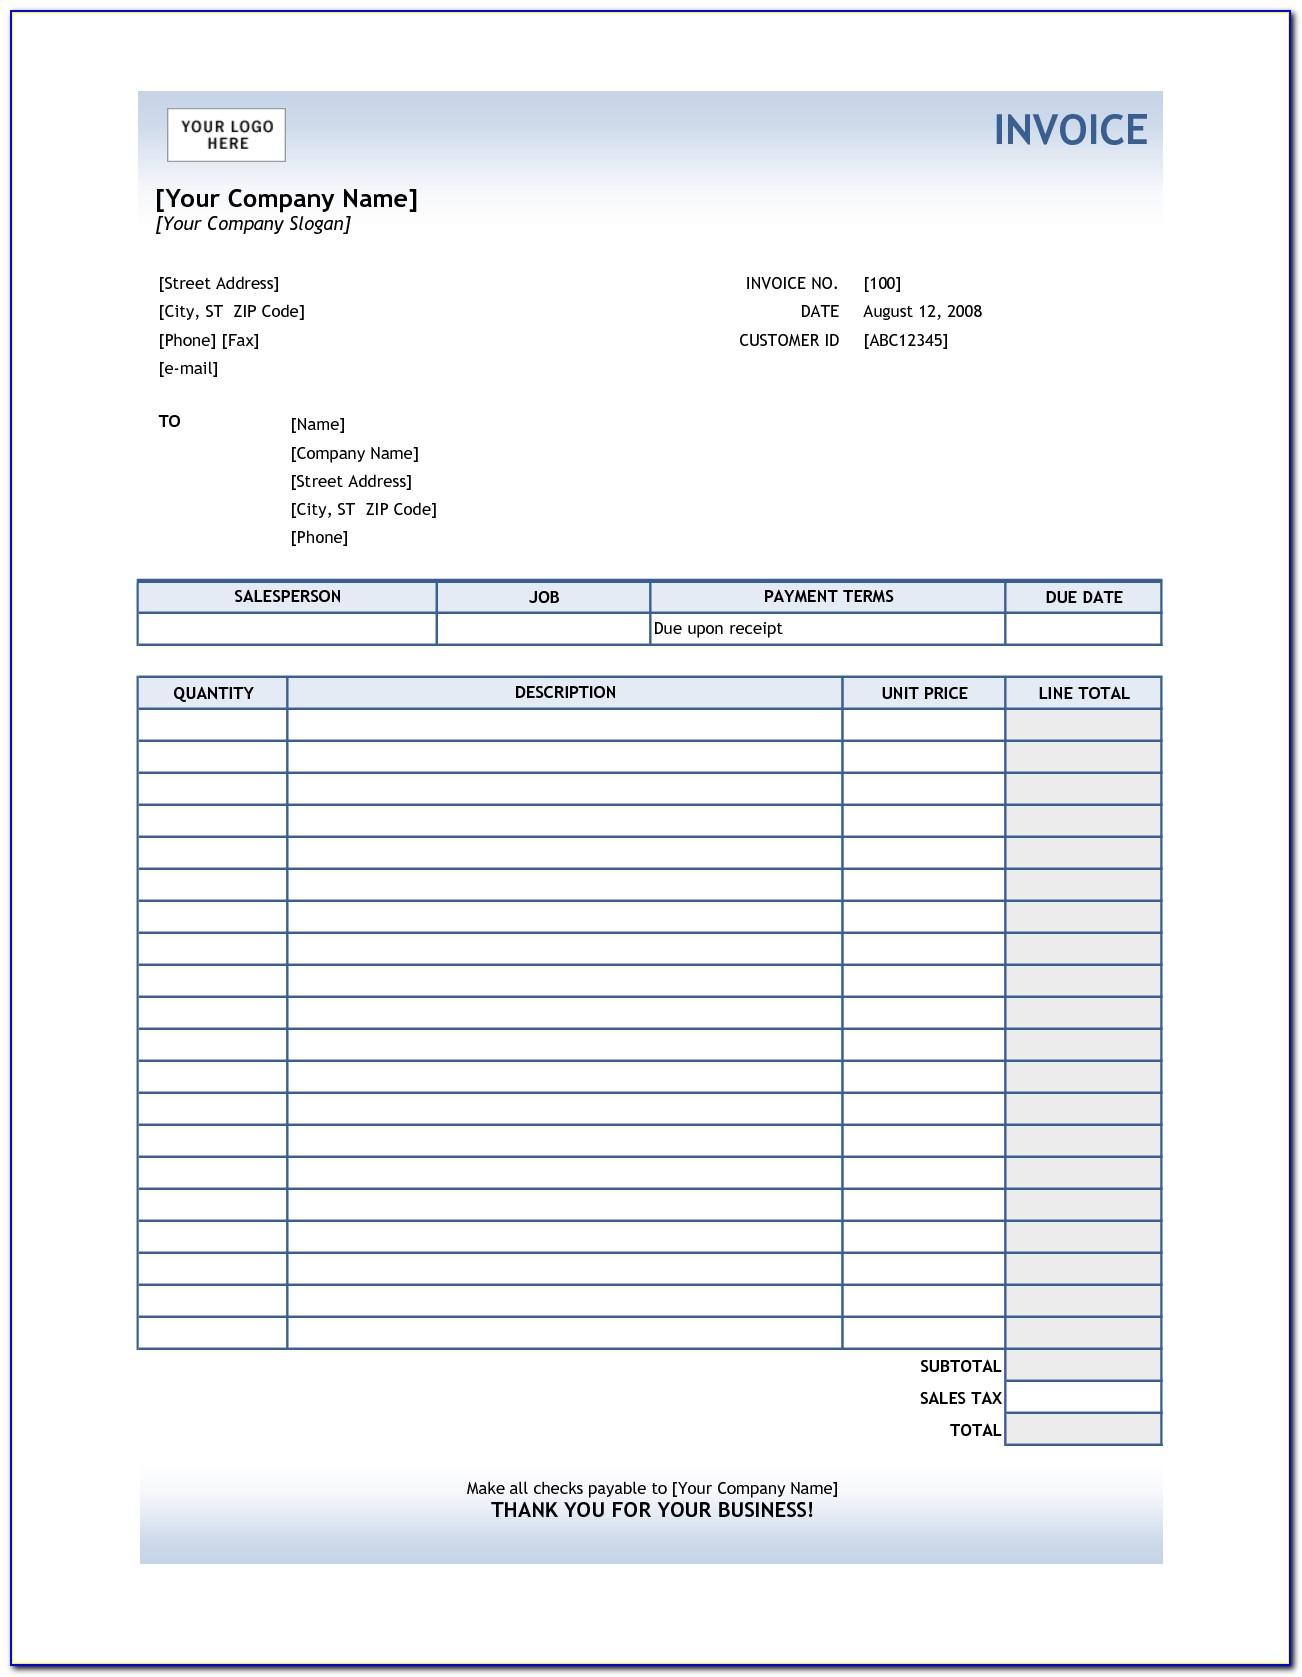 Templates For Invoices And Receipts